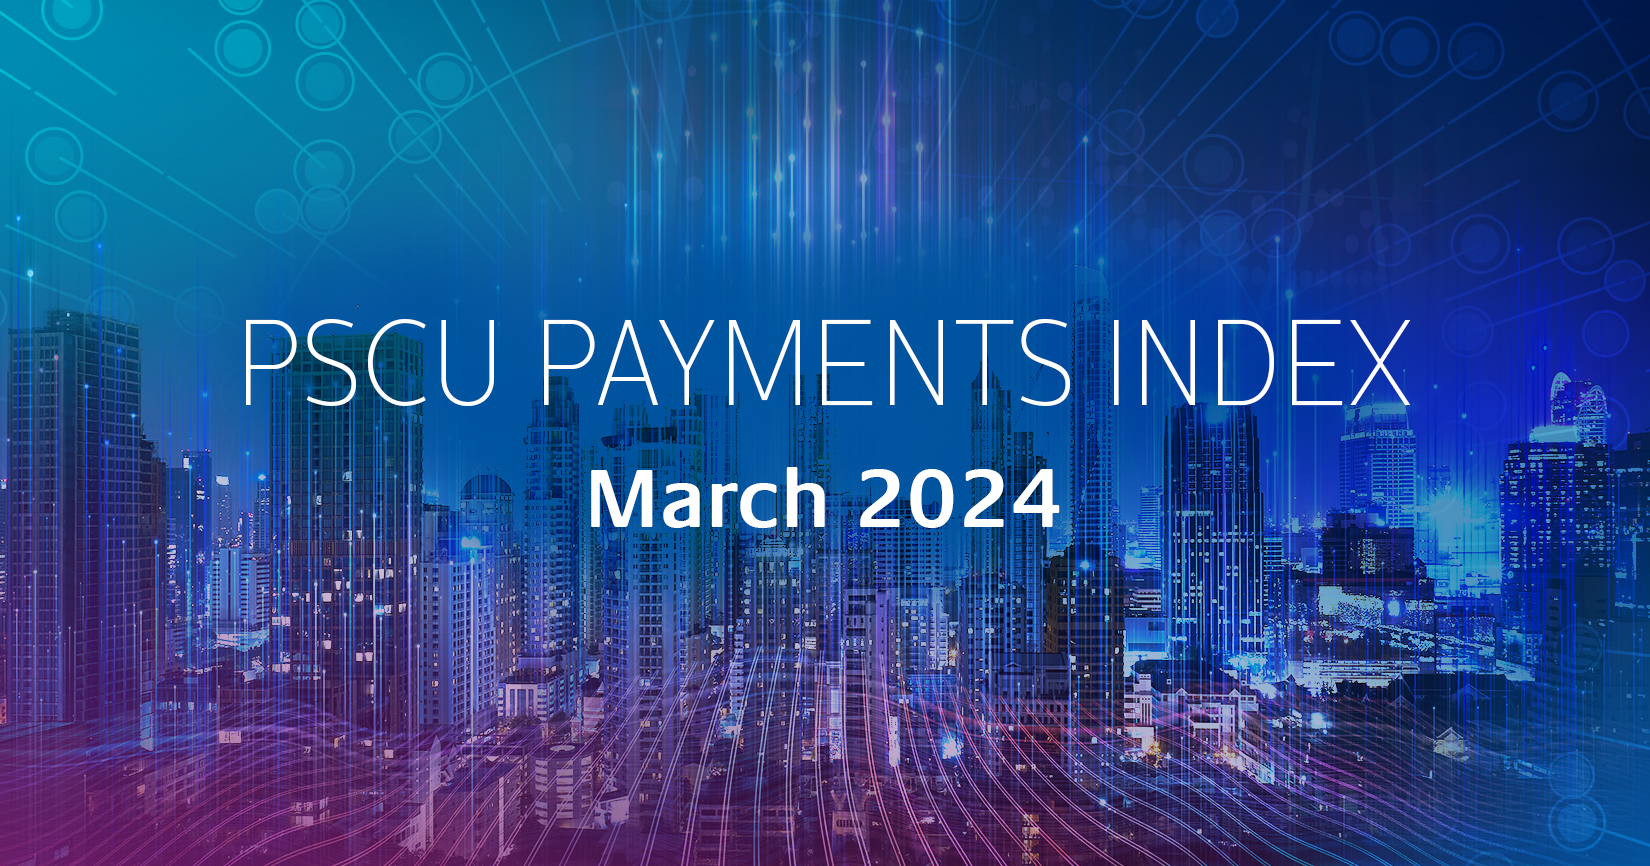 PSCU Payments Index March 2024: A Deep Dive into Gambling